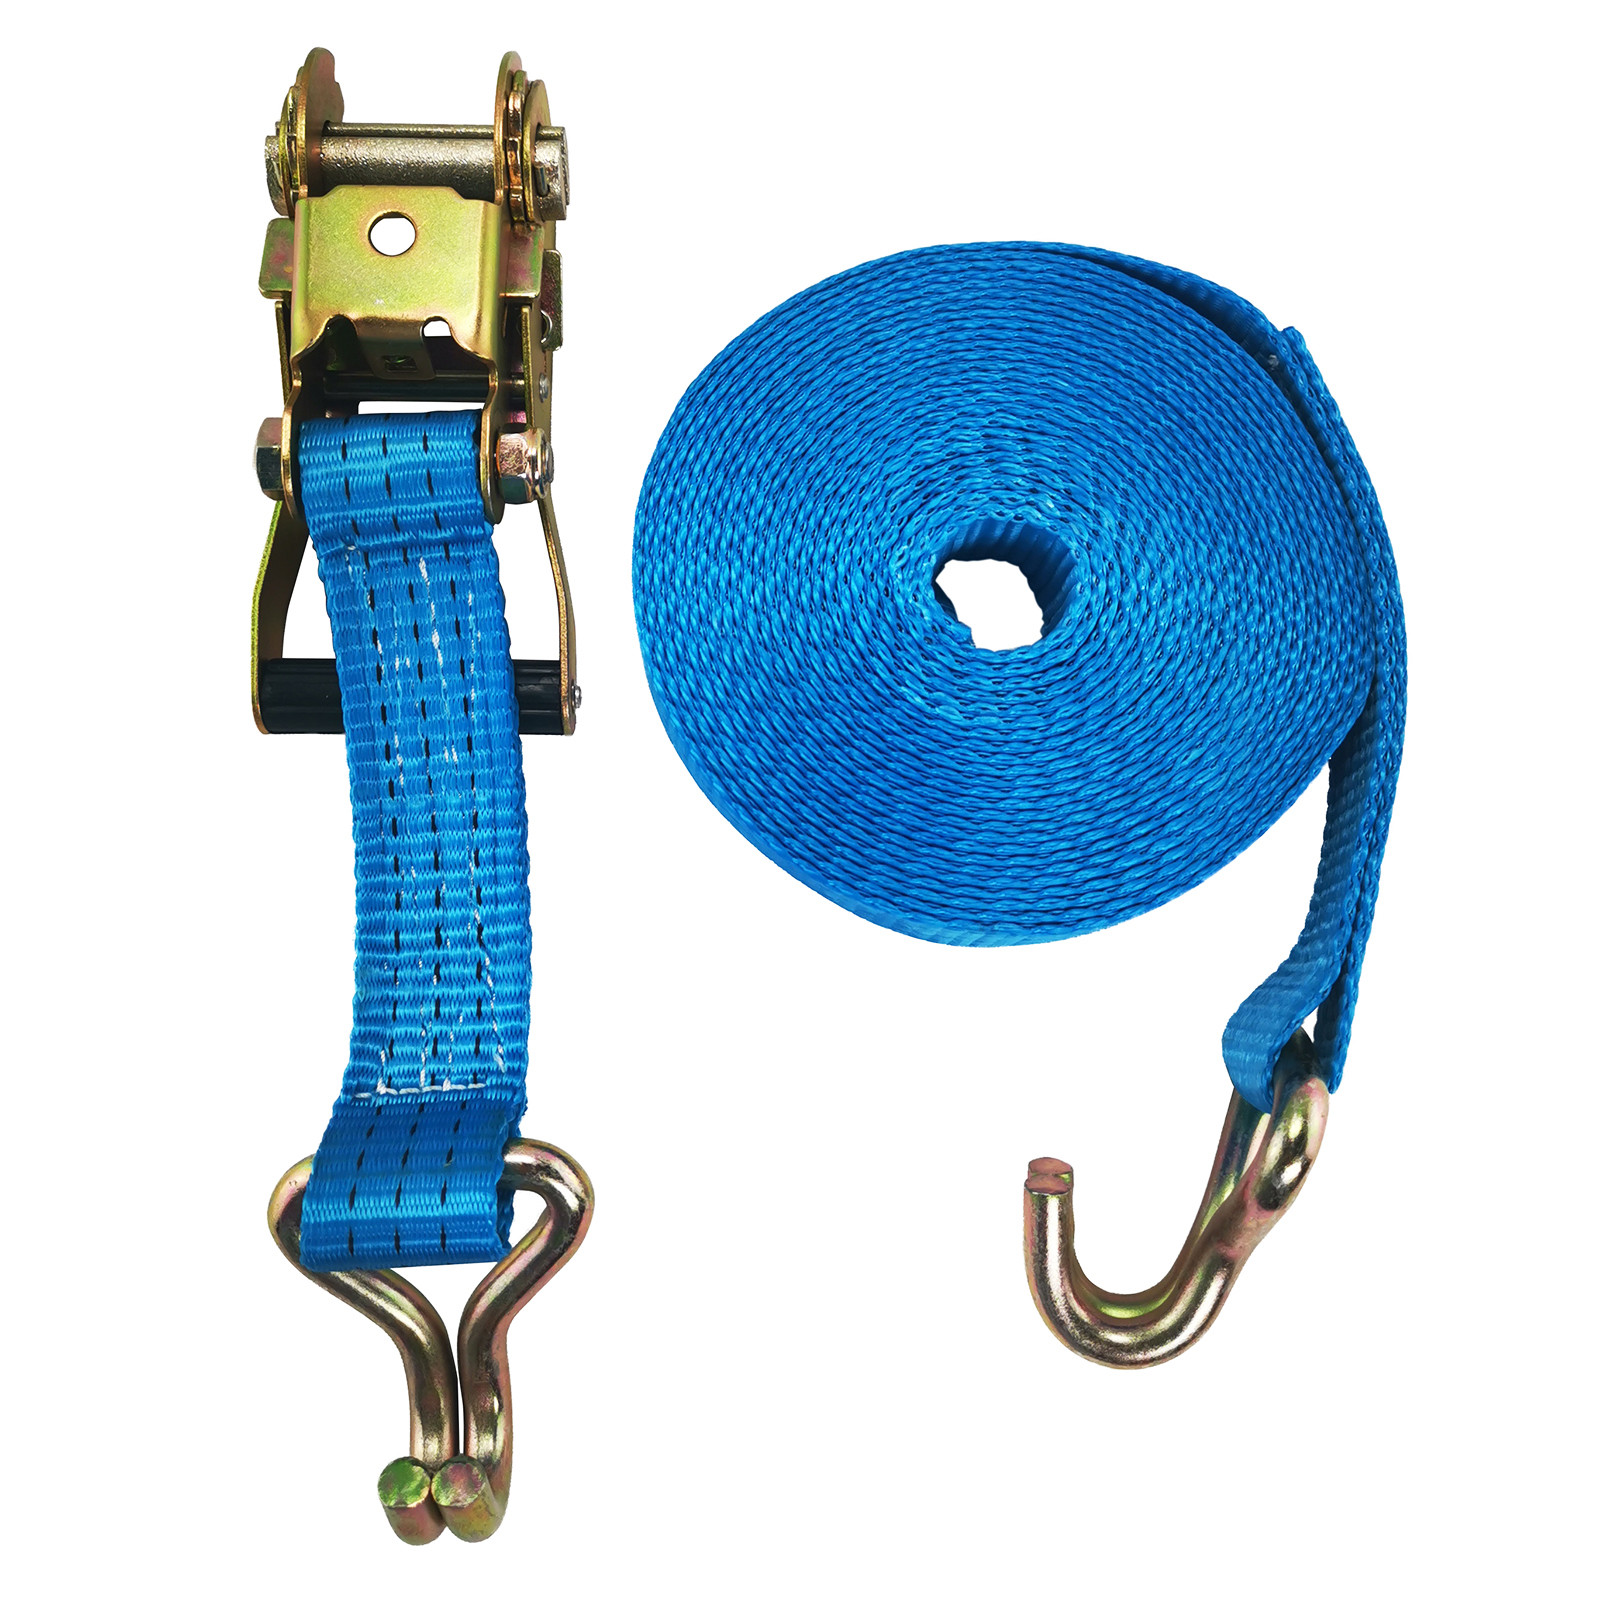 BYF-10T Fasten Strap The Ultimate Trailer Spare Part for Heavy Duty Lashing Needs